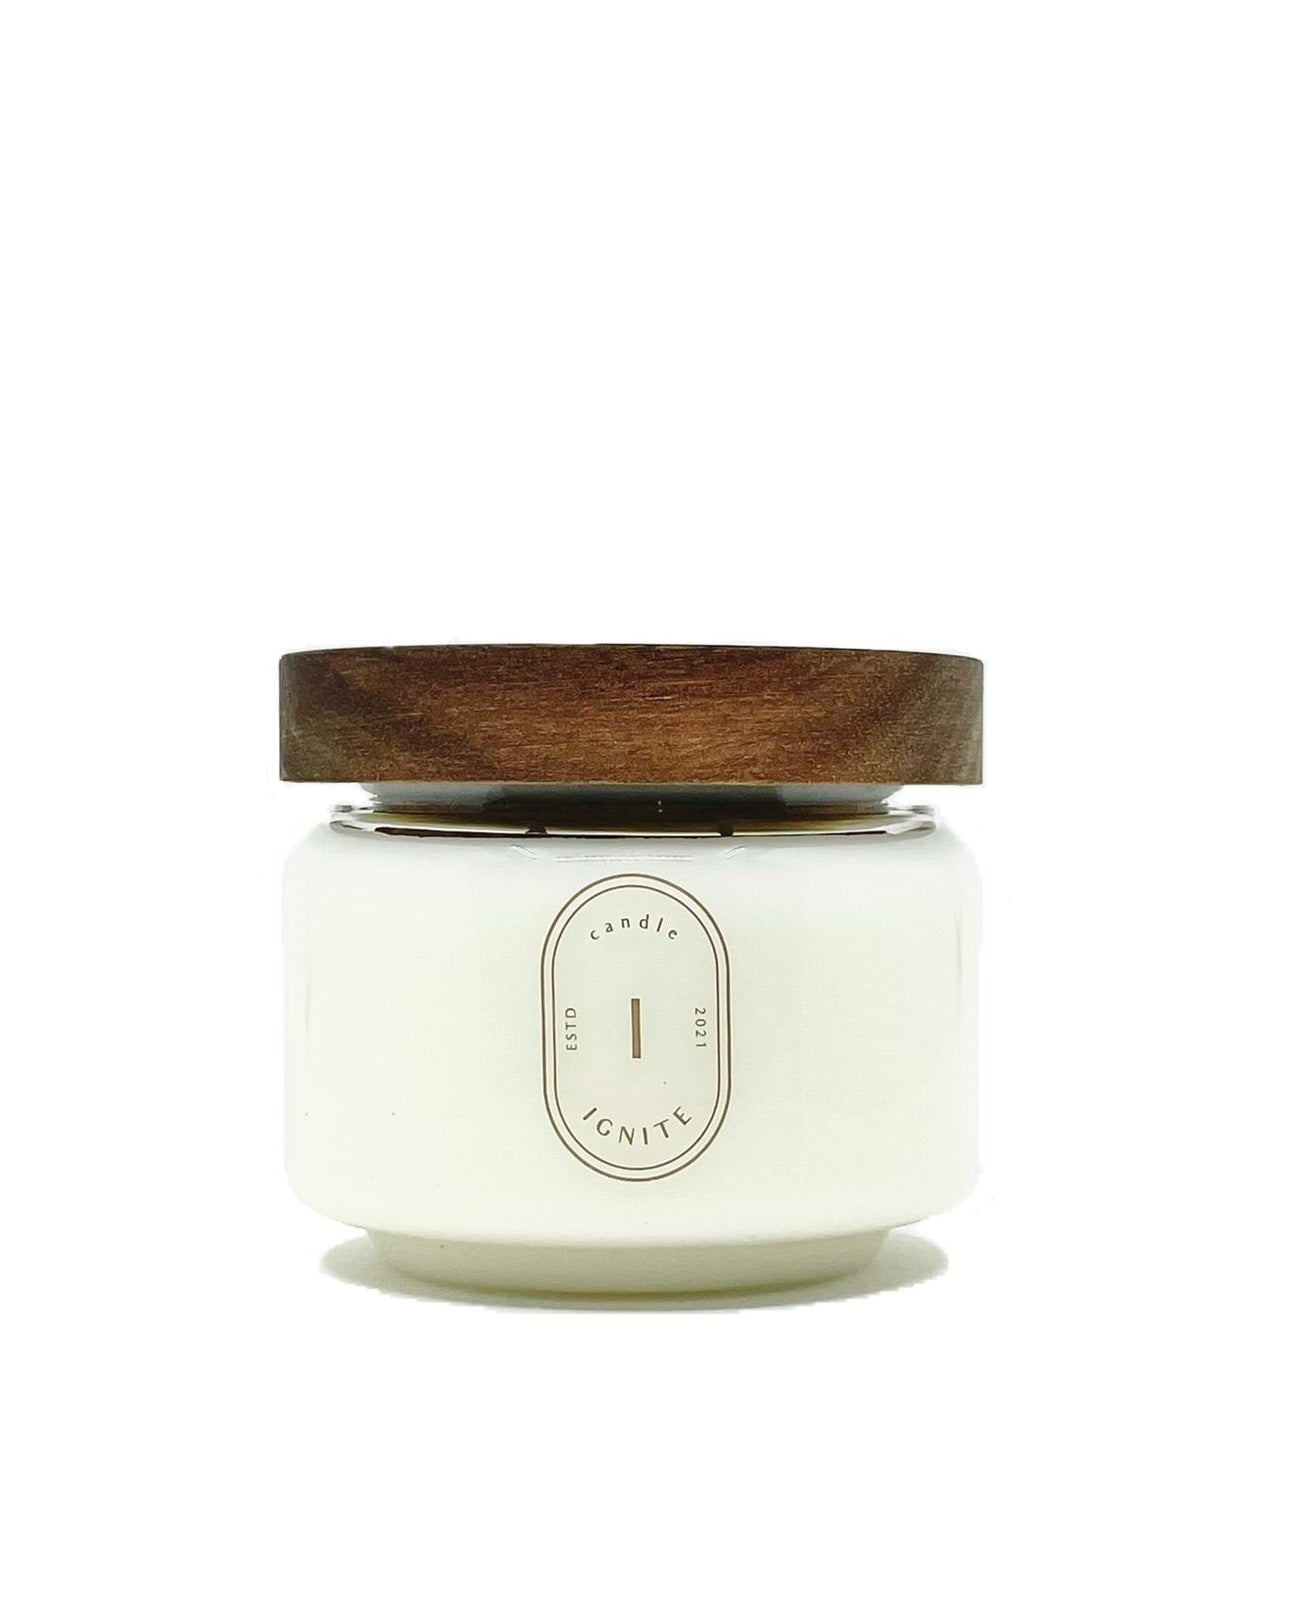 Concentration aromatherapy scented candle